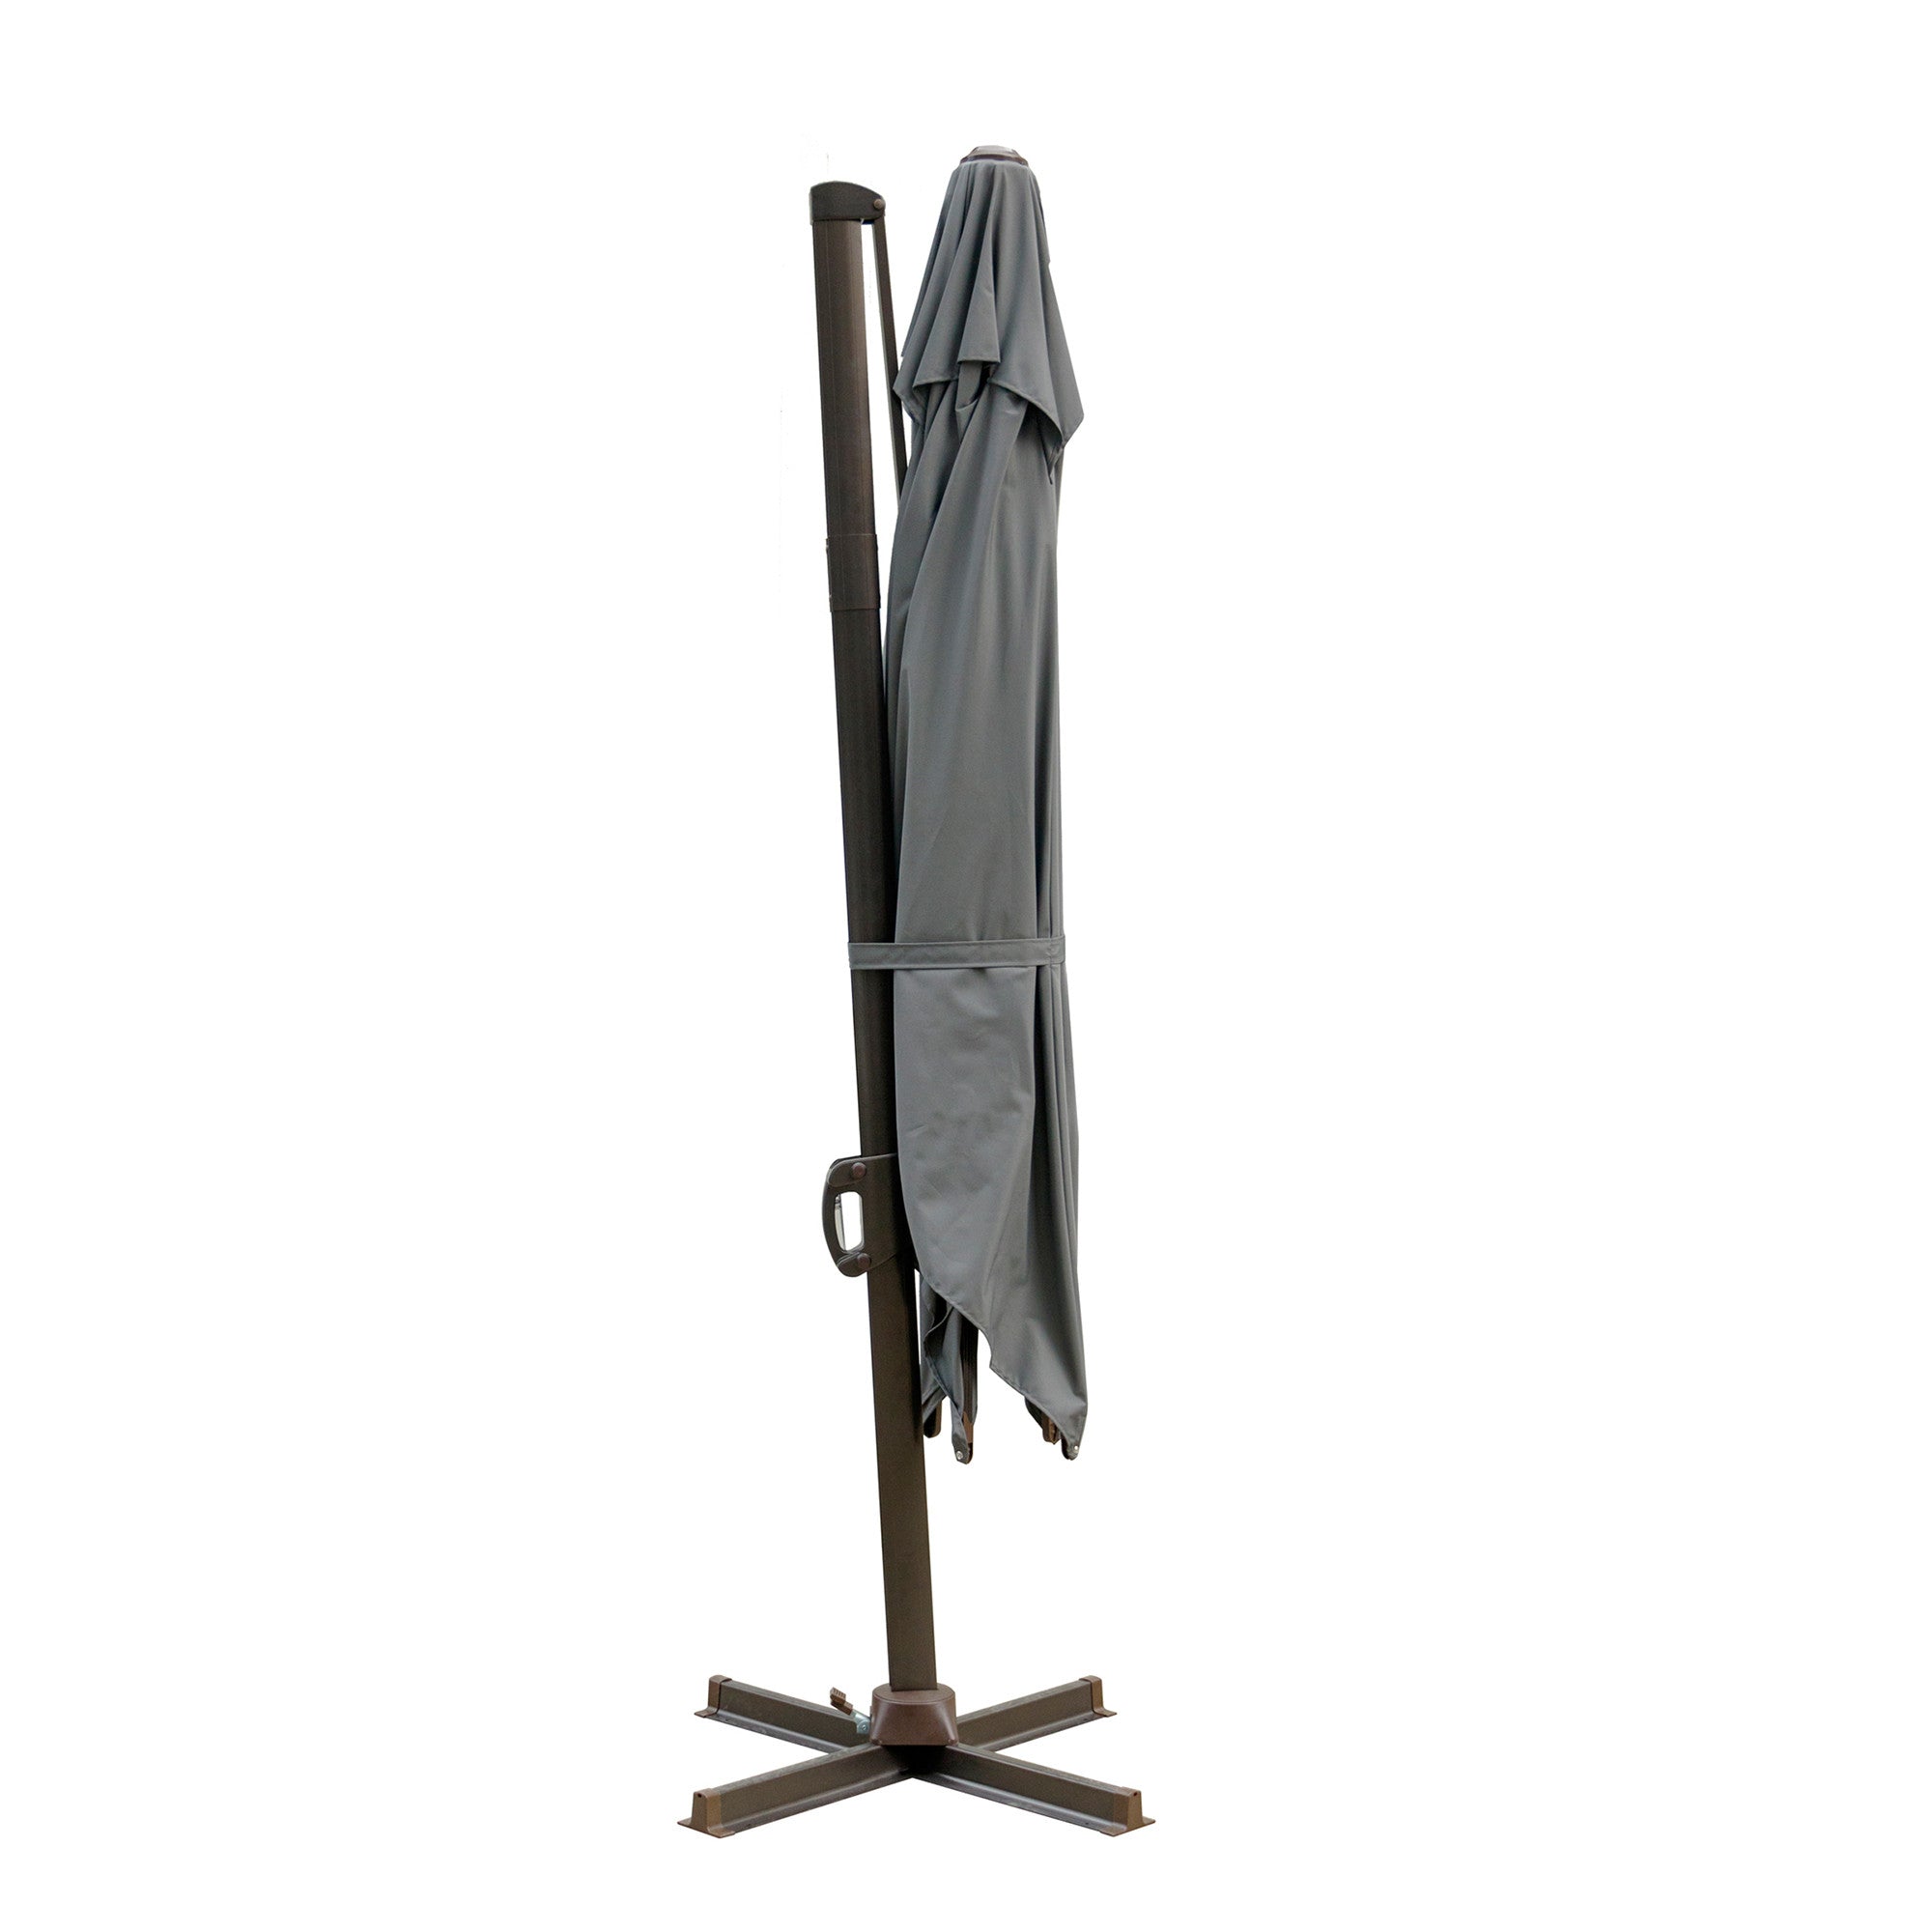 10' Dark Gray Polyester Square Tilt Cantilever Patio Umbrella With Stand